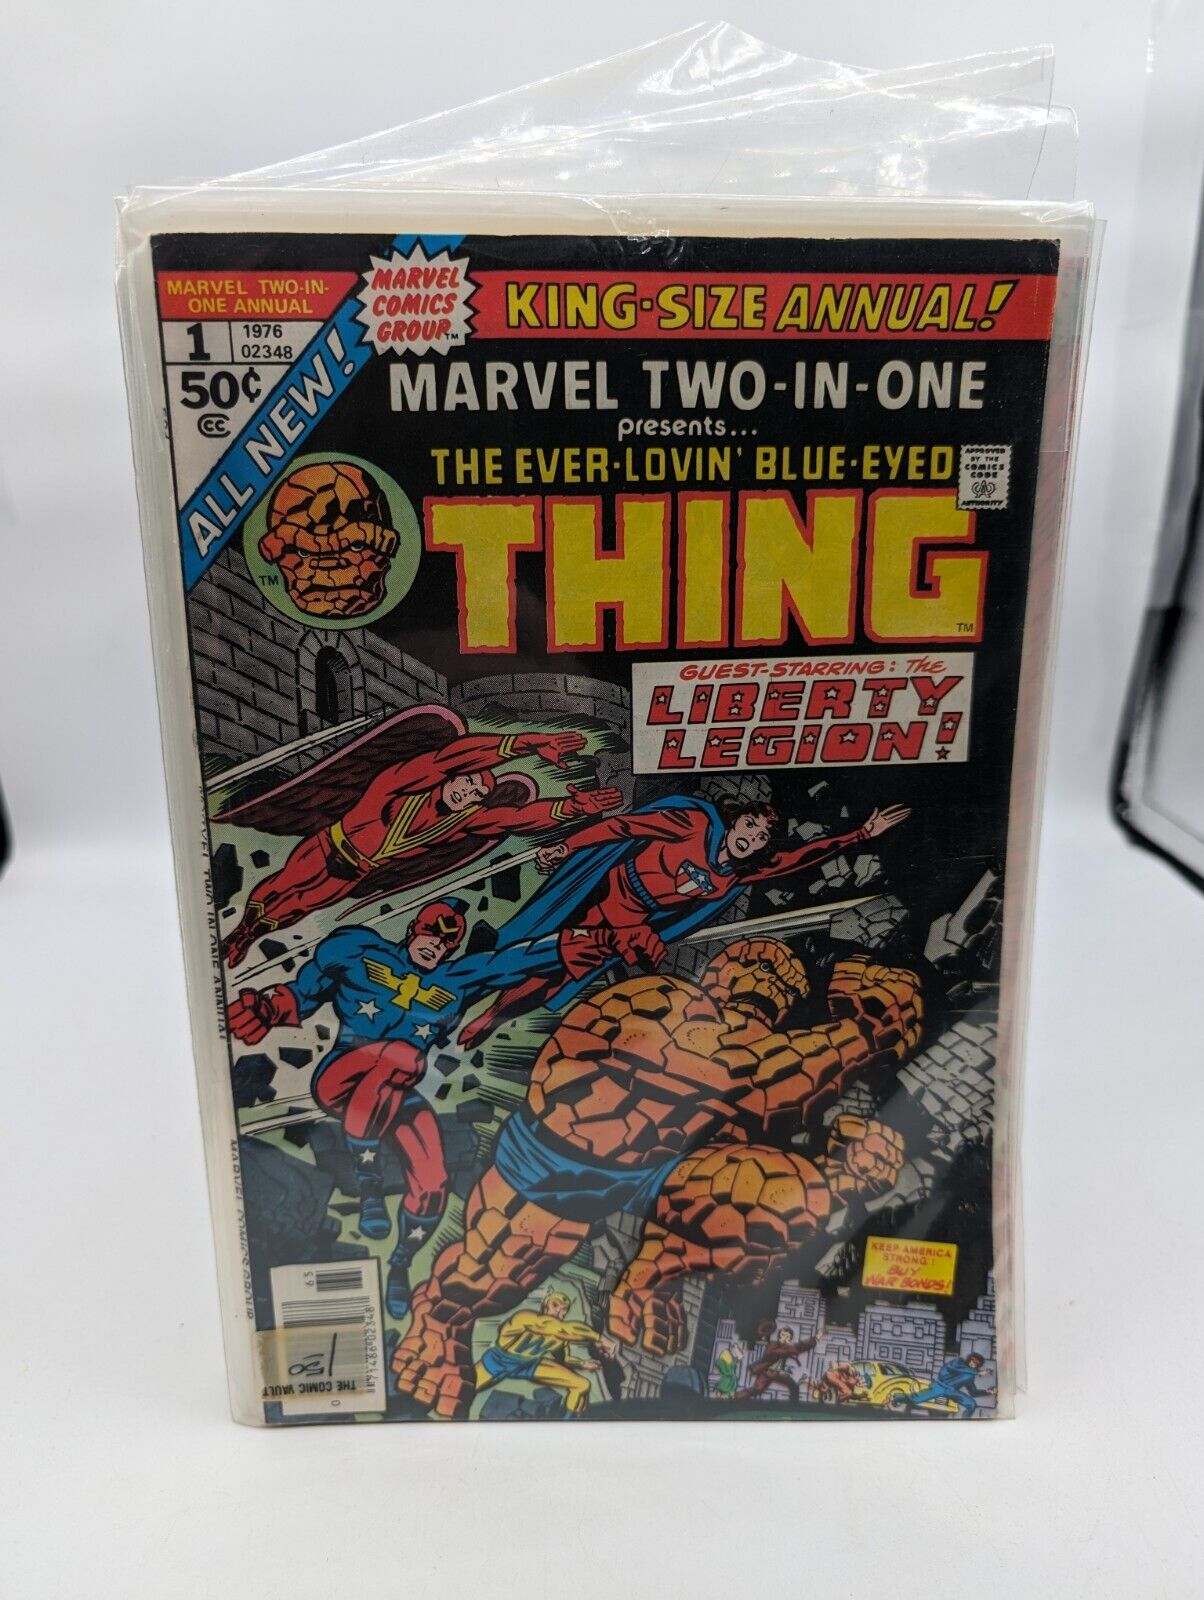 MARVEL TWO-IN-ONE Annual #1 (1976)